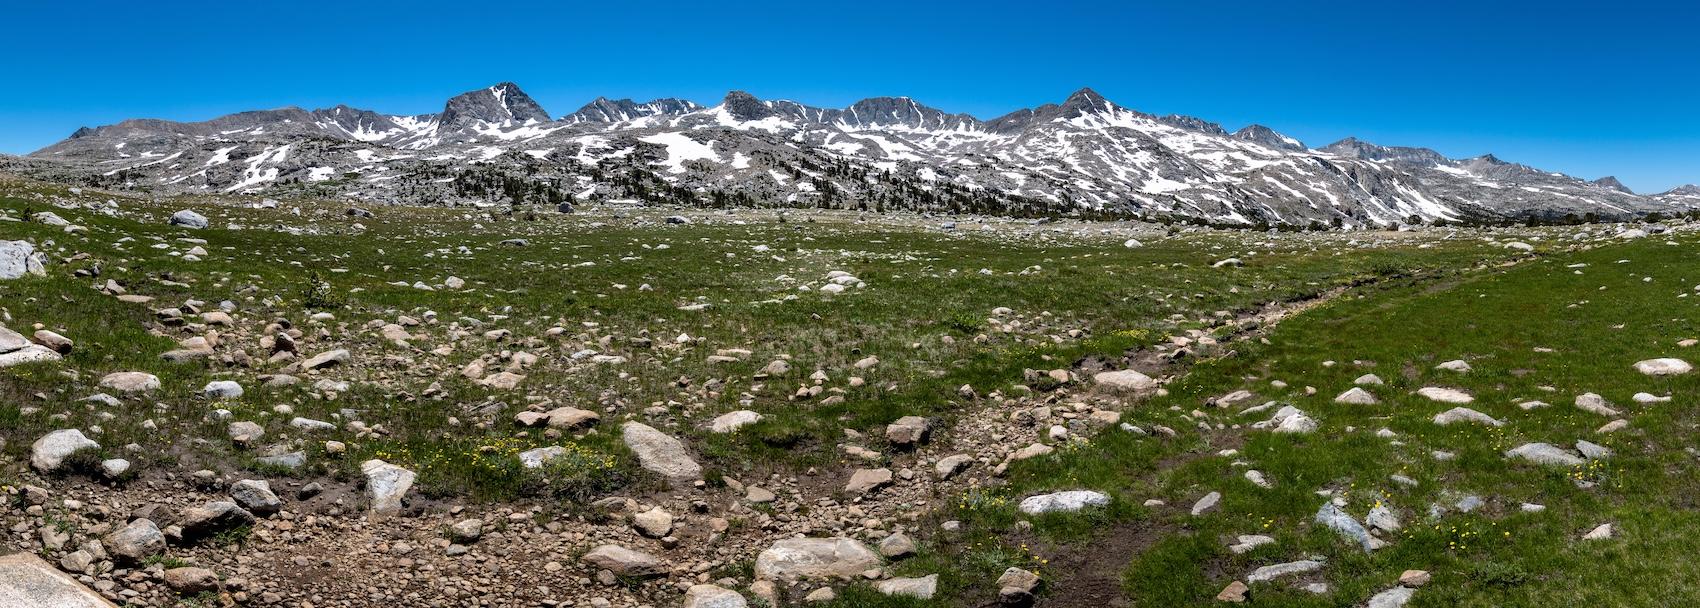 Trailside panorama of the mountains in Humphreys Basin